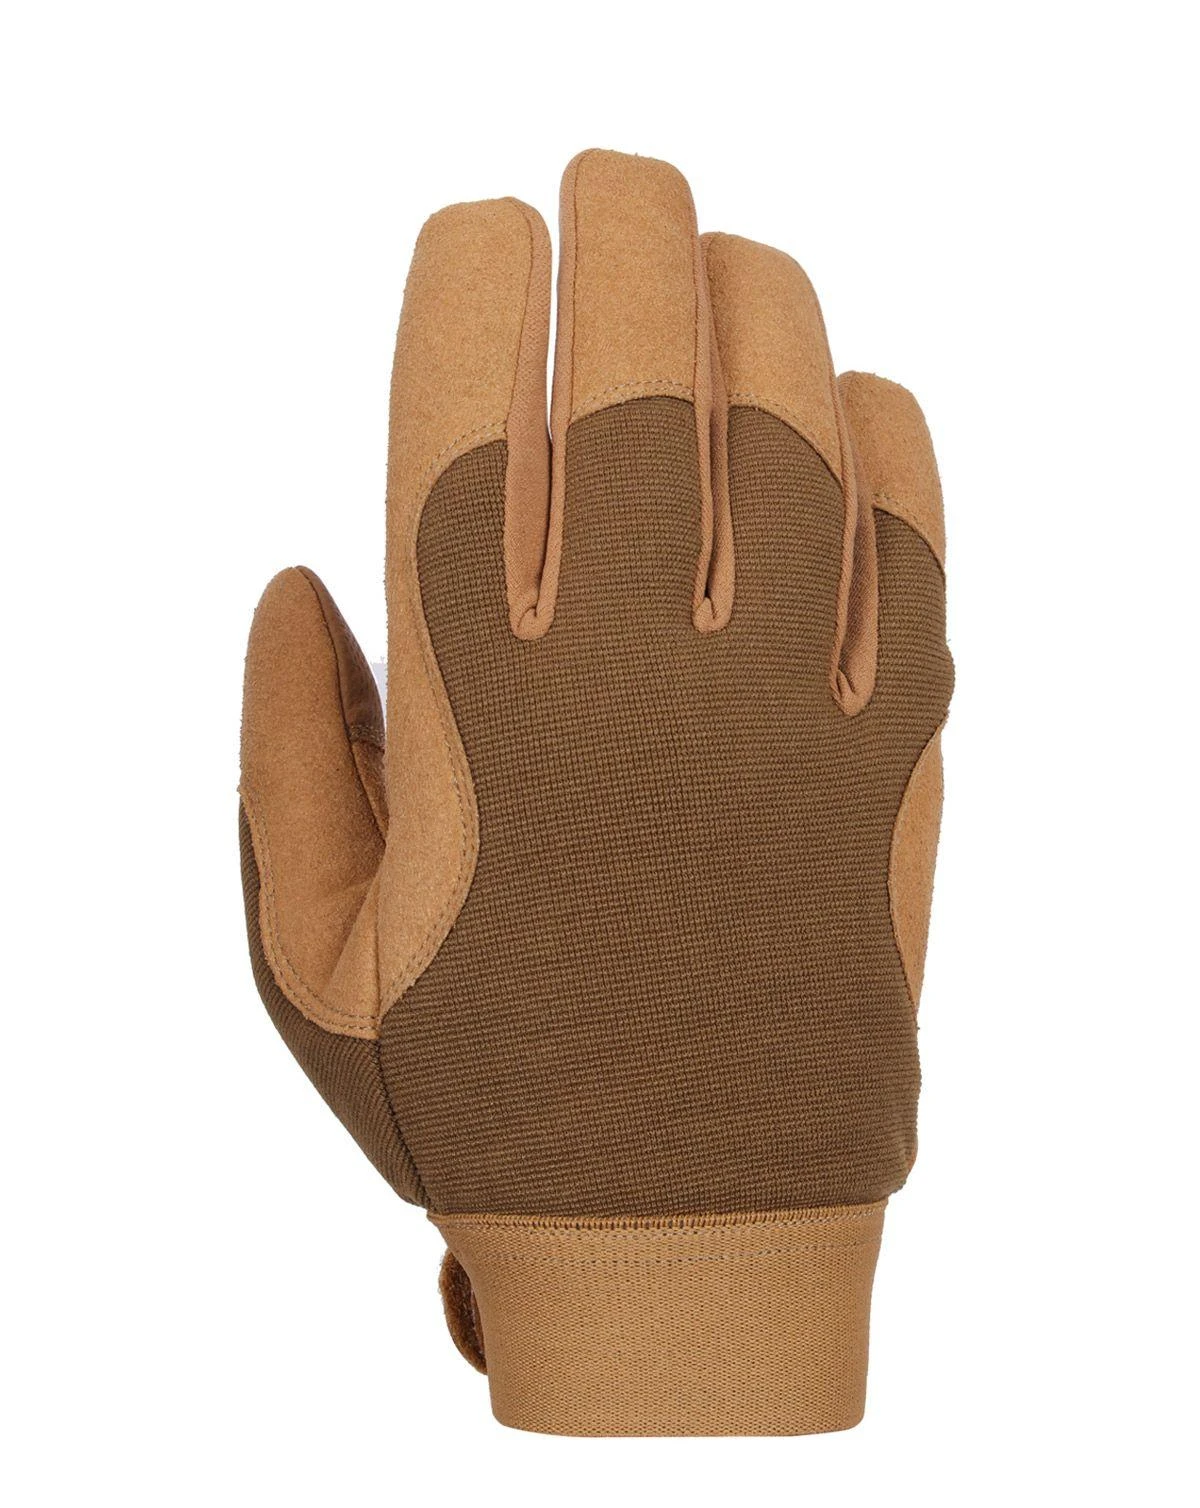 Buy [Gloves & Mittens | Money Back Guarantee | ARMY STAR | Handschuhe